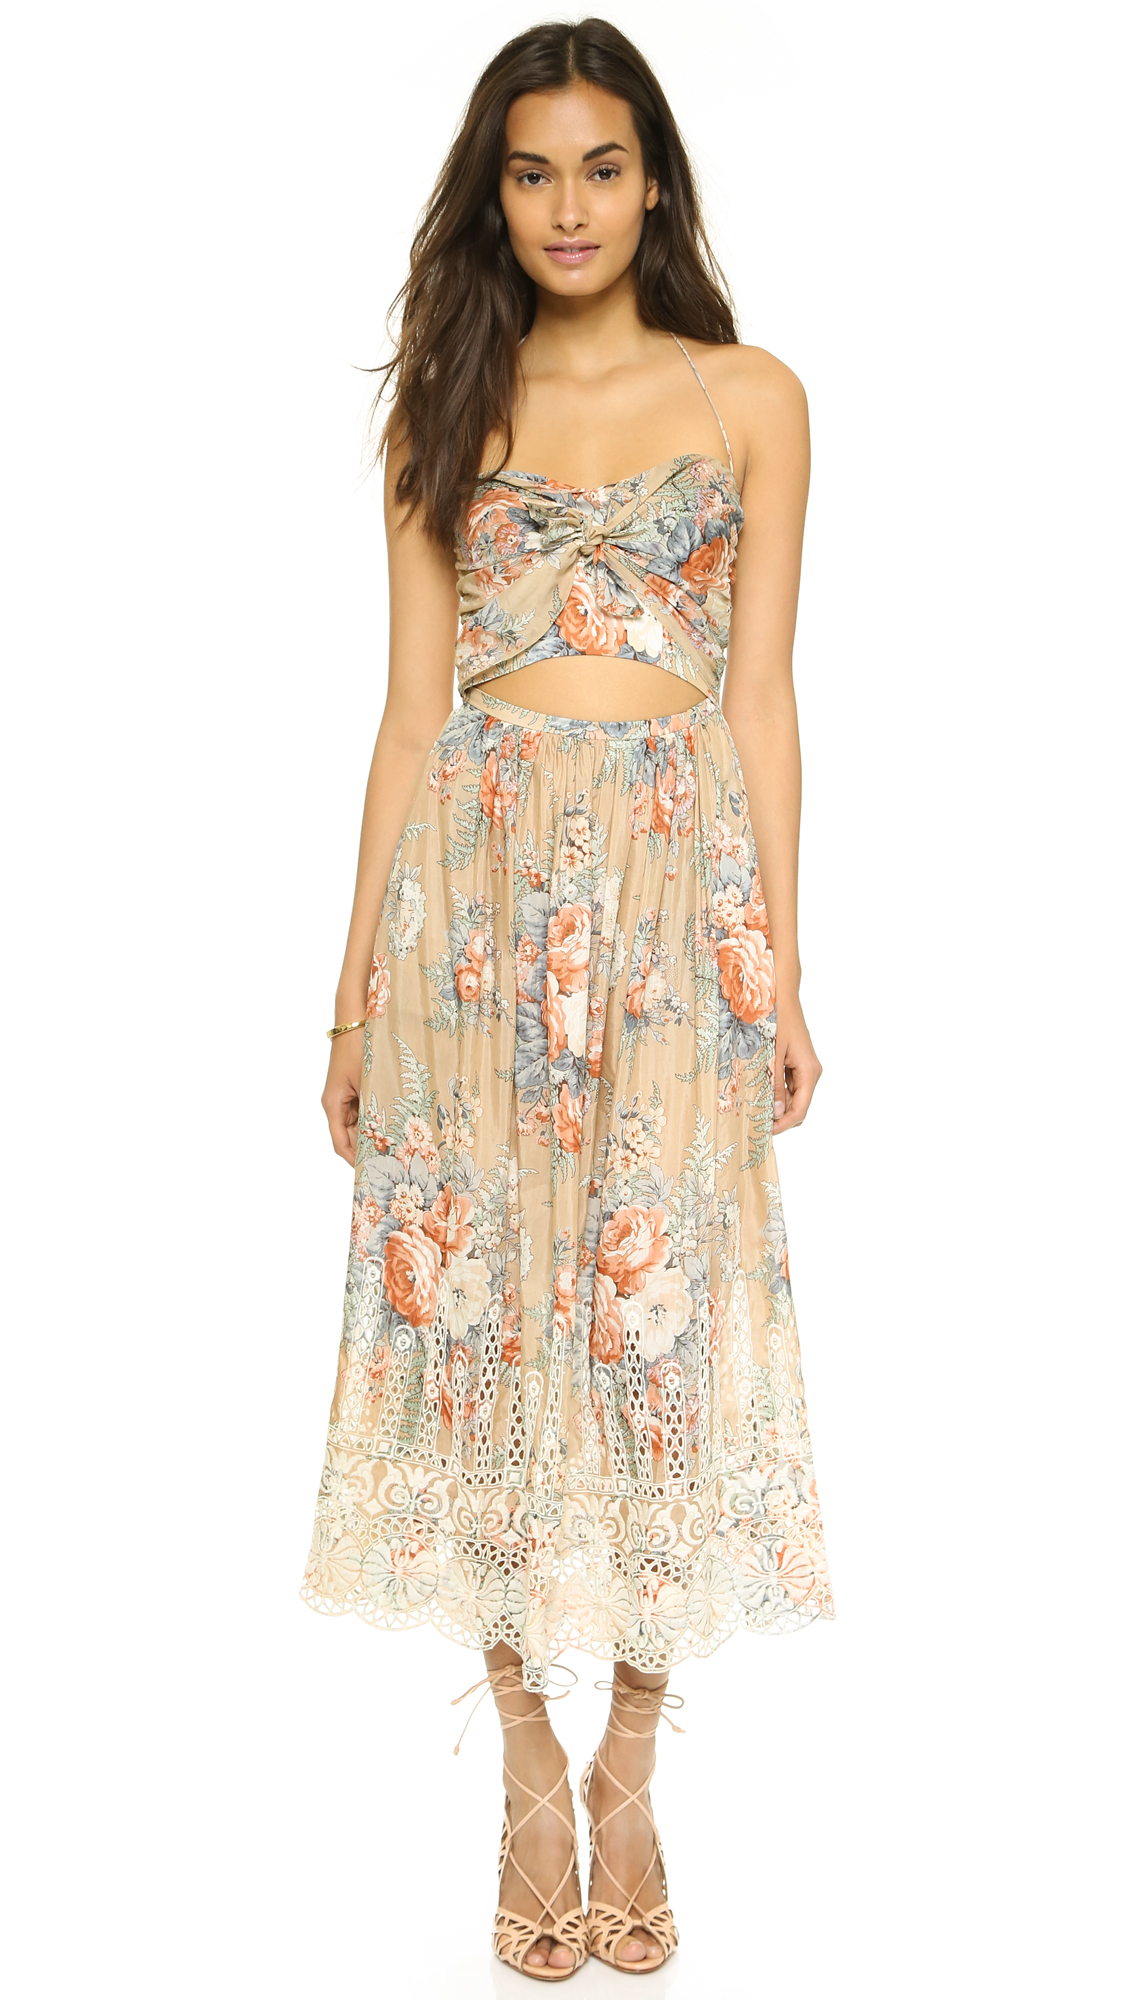 luxxel Nude Monochrome Floral Gown from Los Angeles by 